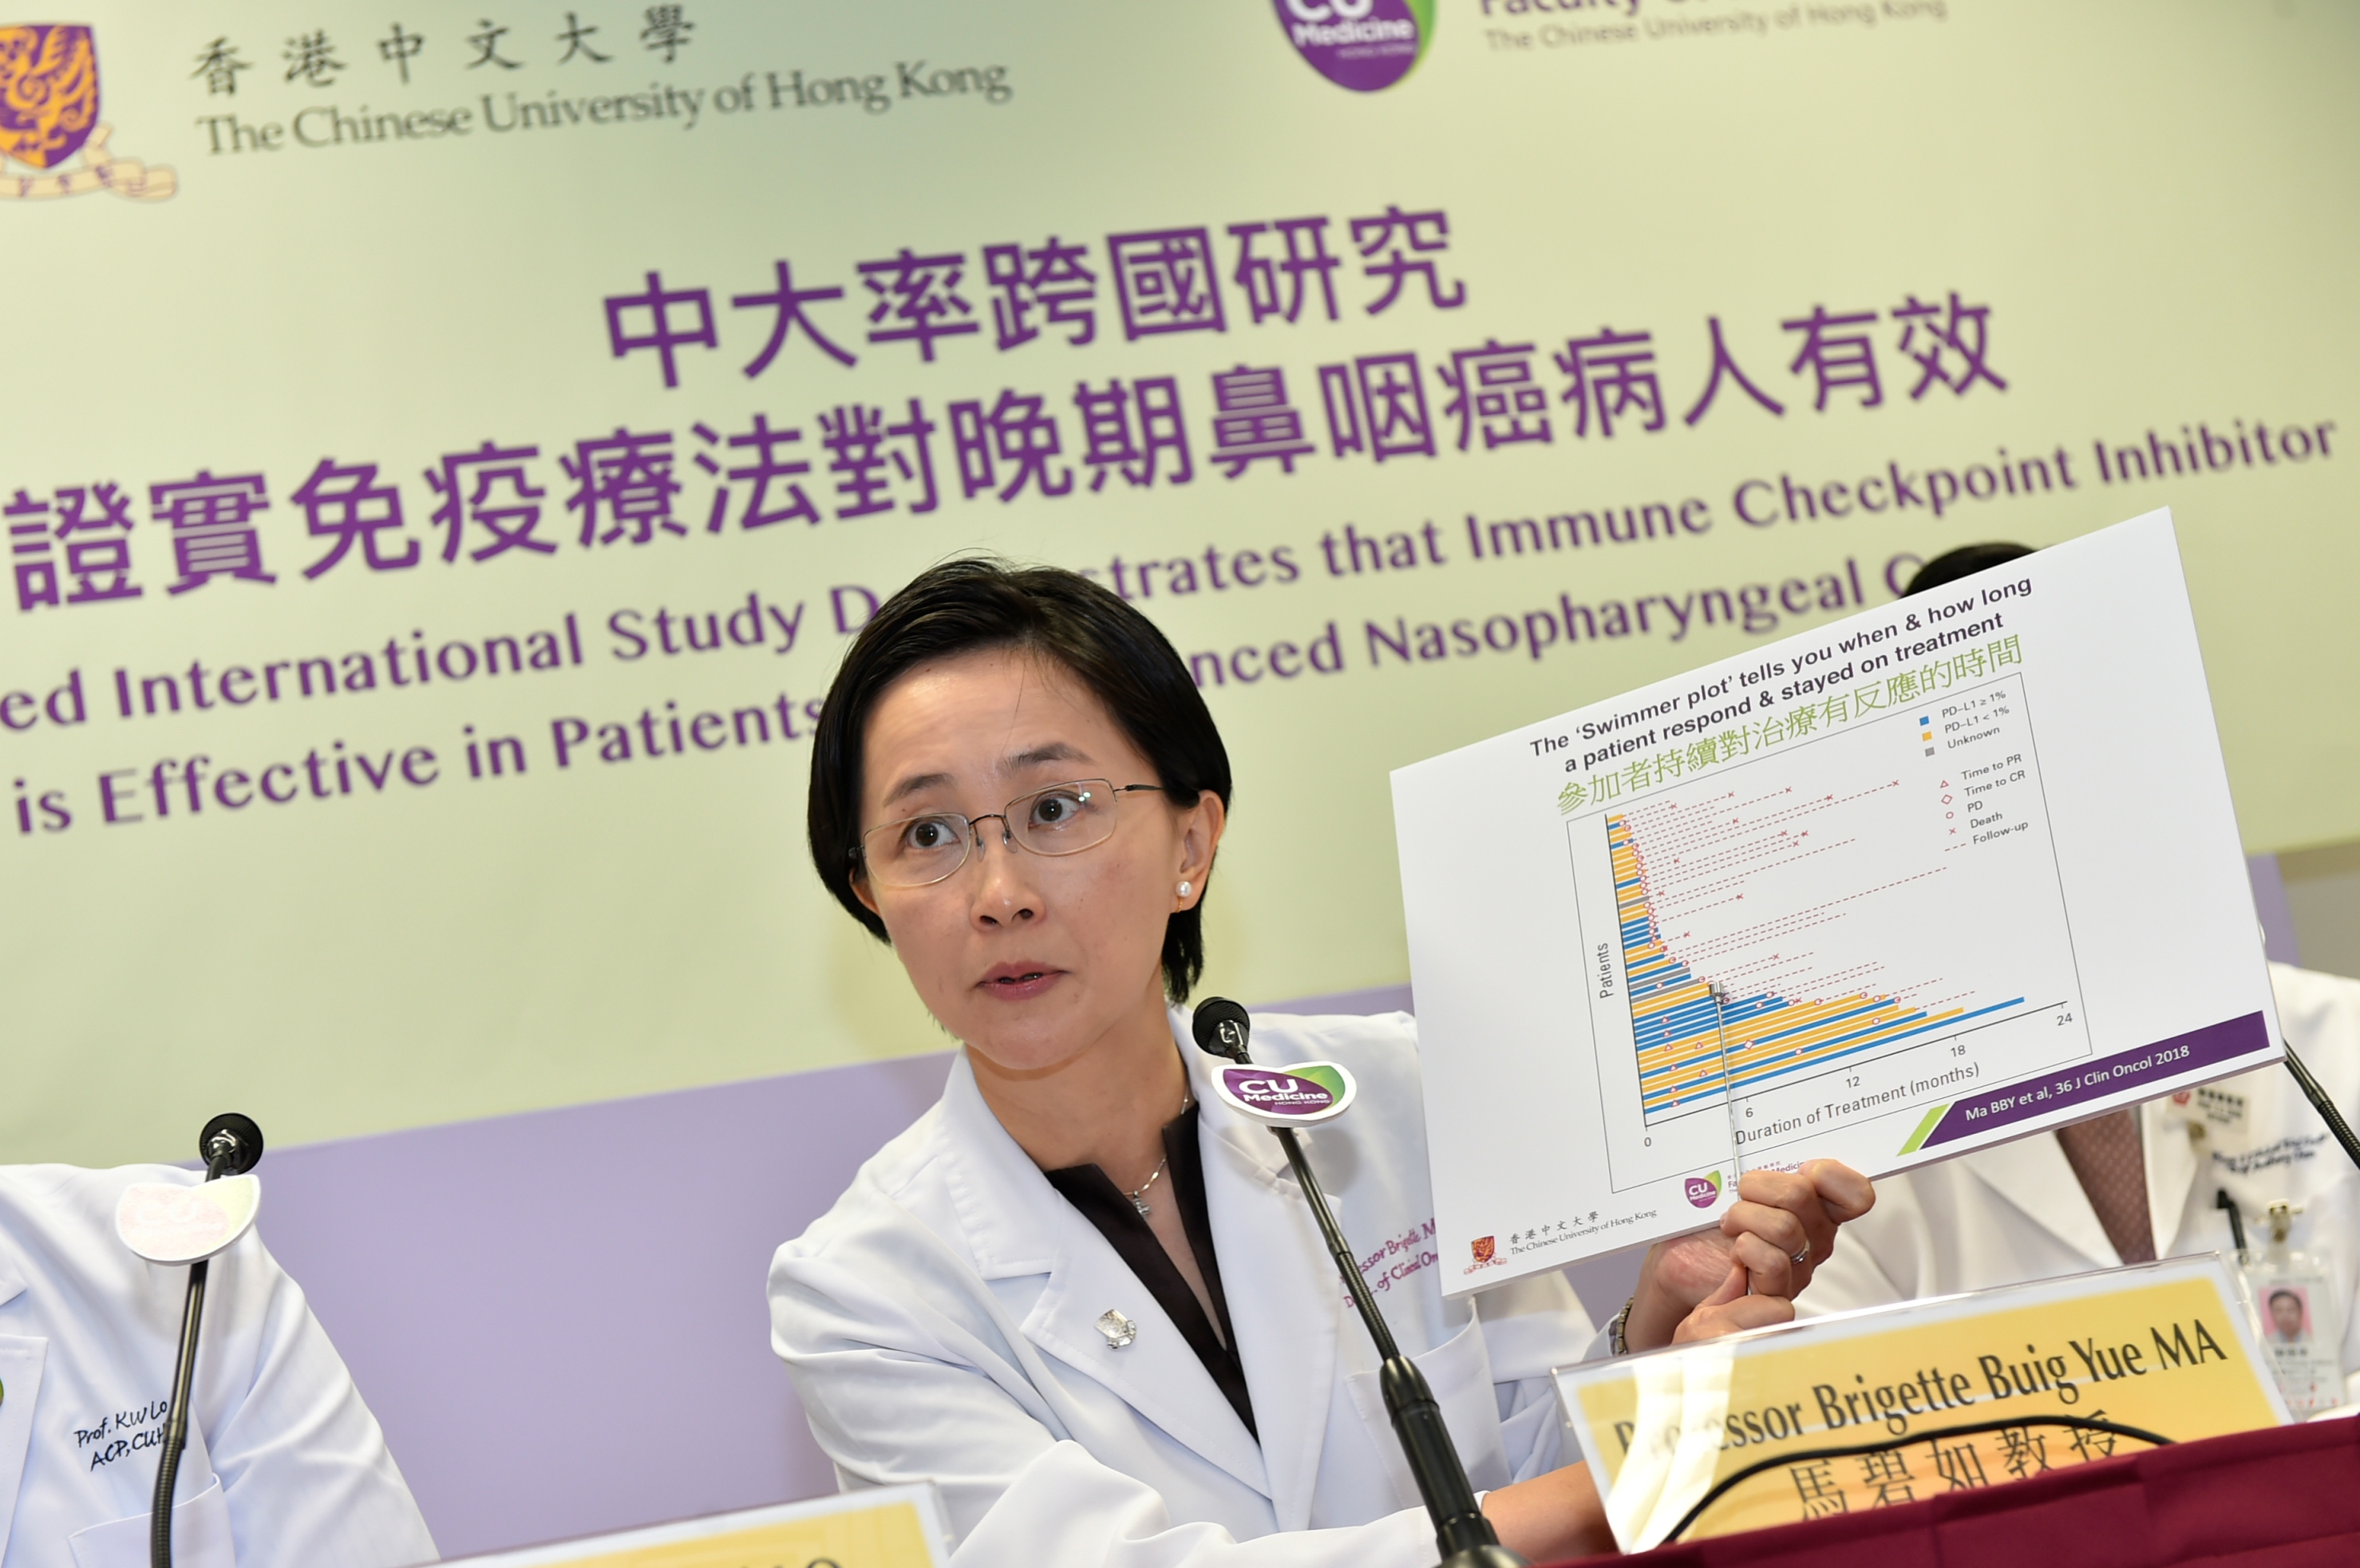 Professor Brigette MA states that the study findings reveal immunotherapy has clinically meaningful and durable activity in some NPC patients.